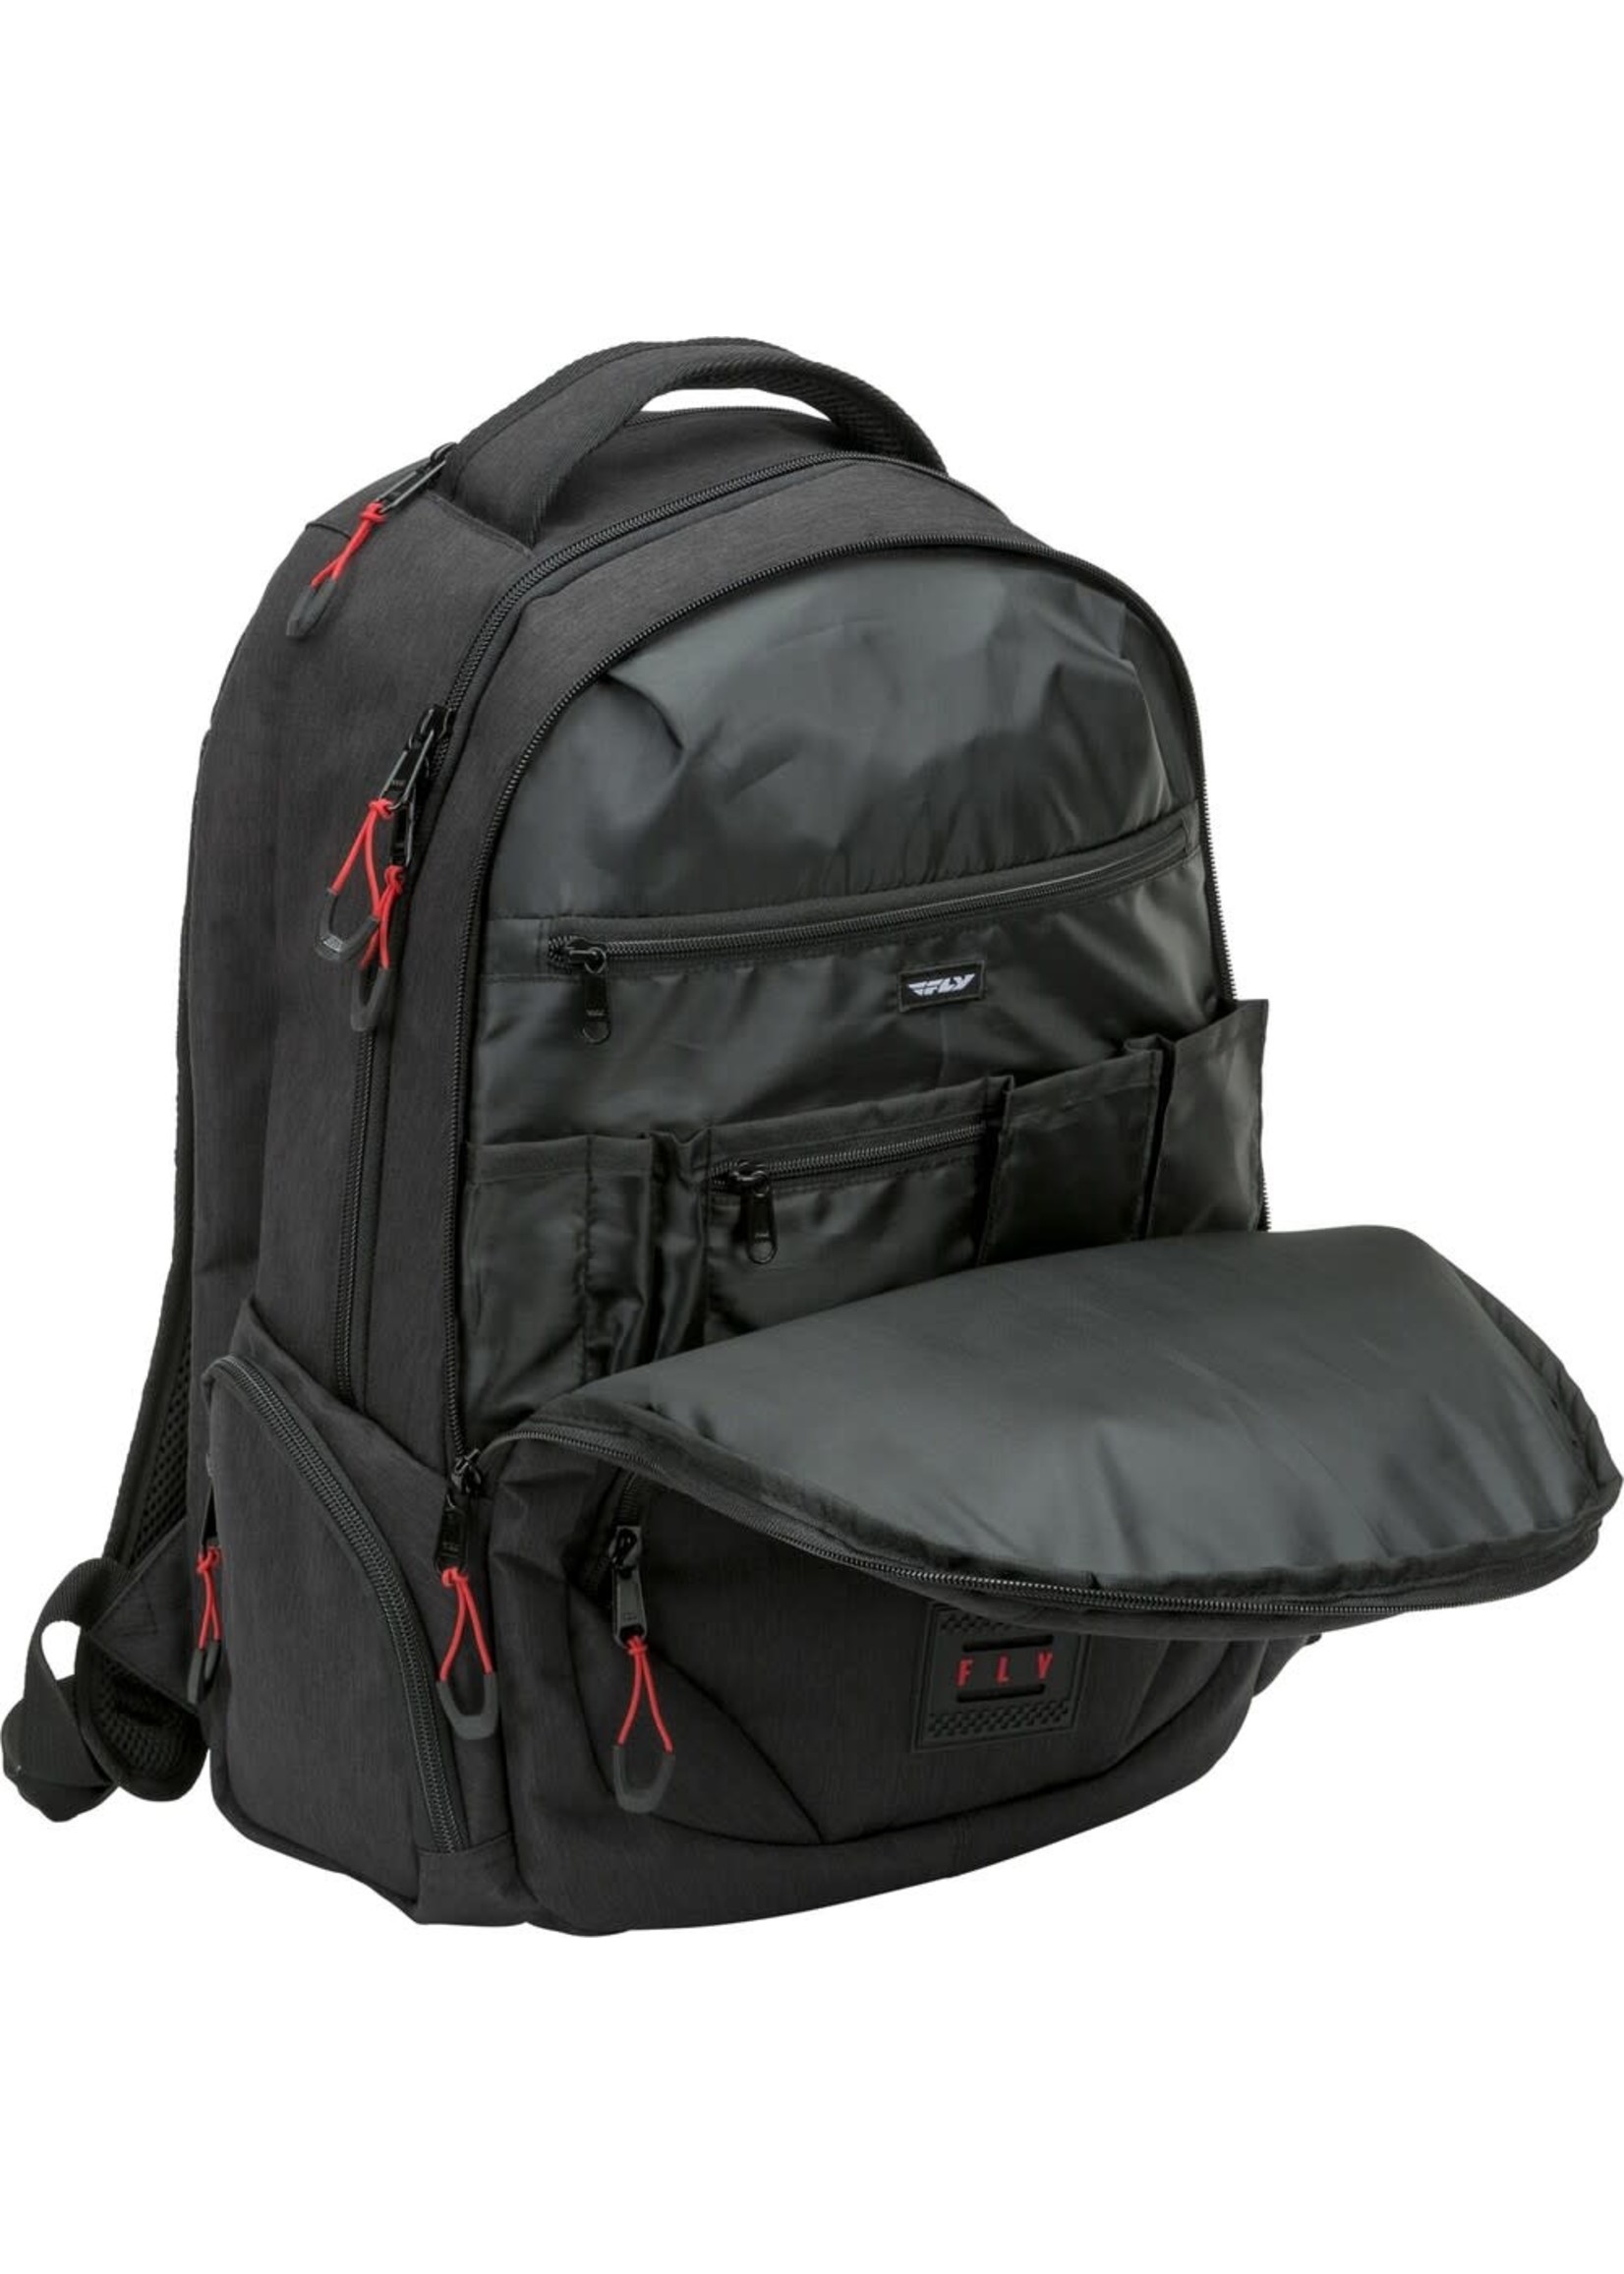 FLY RACING FLY RACING MAIN EVENT BACKPACK BLACK